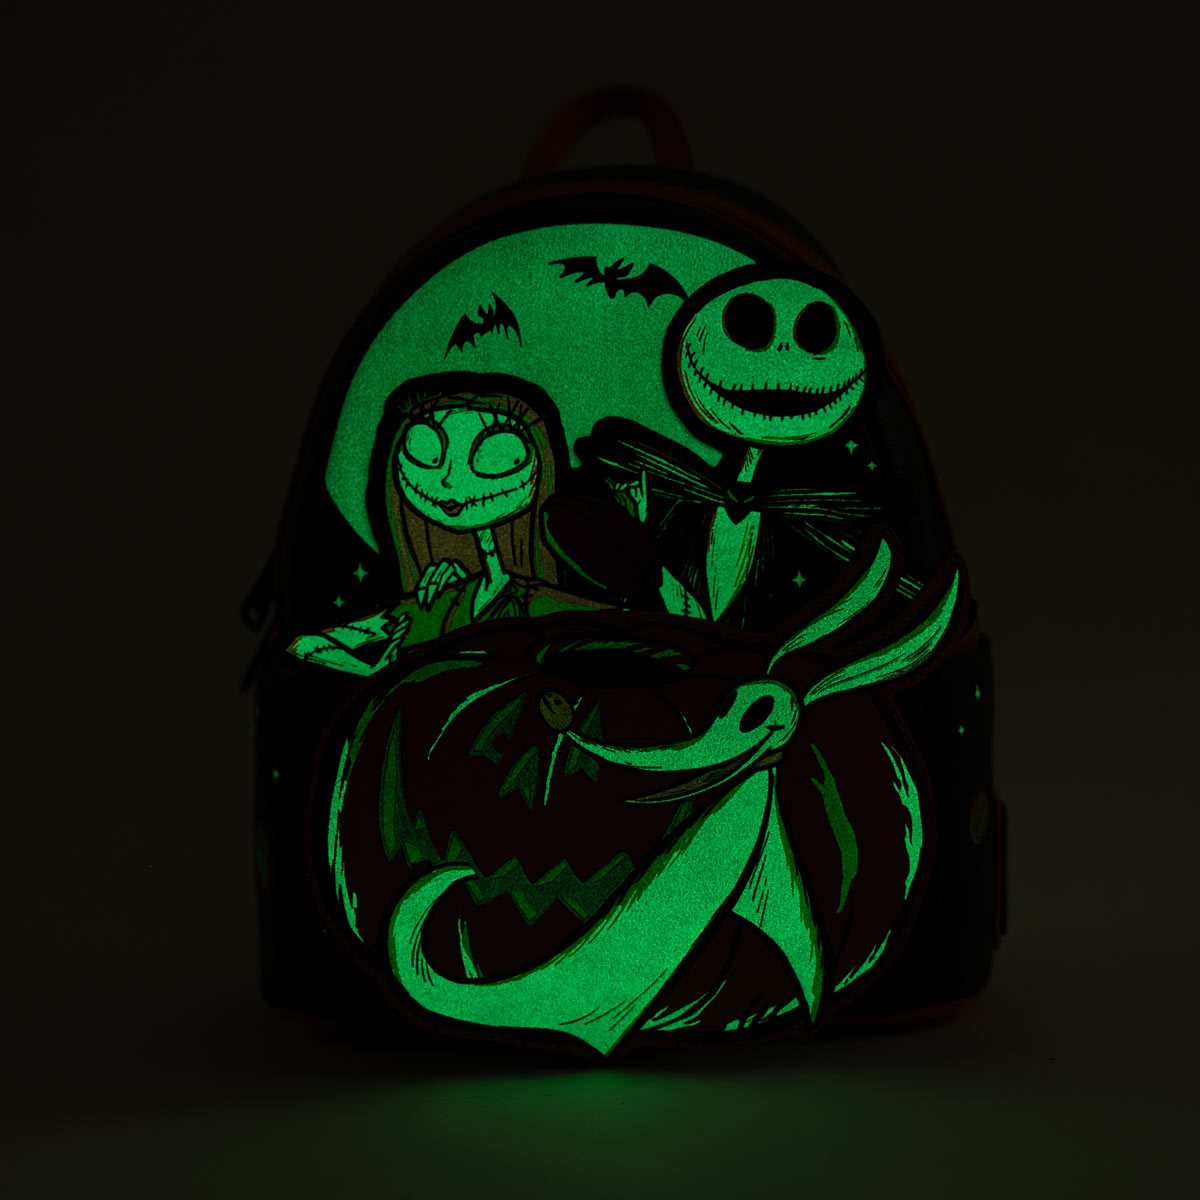 Disney 100 Halloween Trick or Treaters Glow-in-the-Dark Mini-Backpack -  Entertainment Earth Exclusive